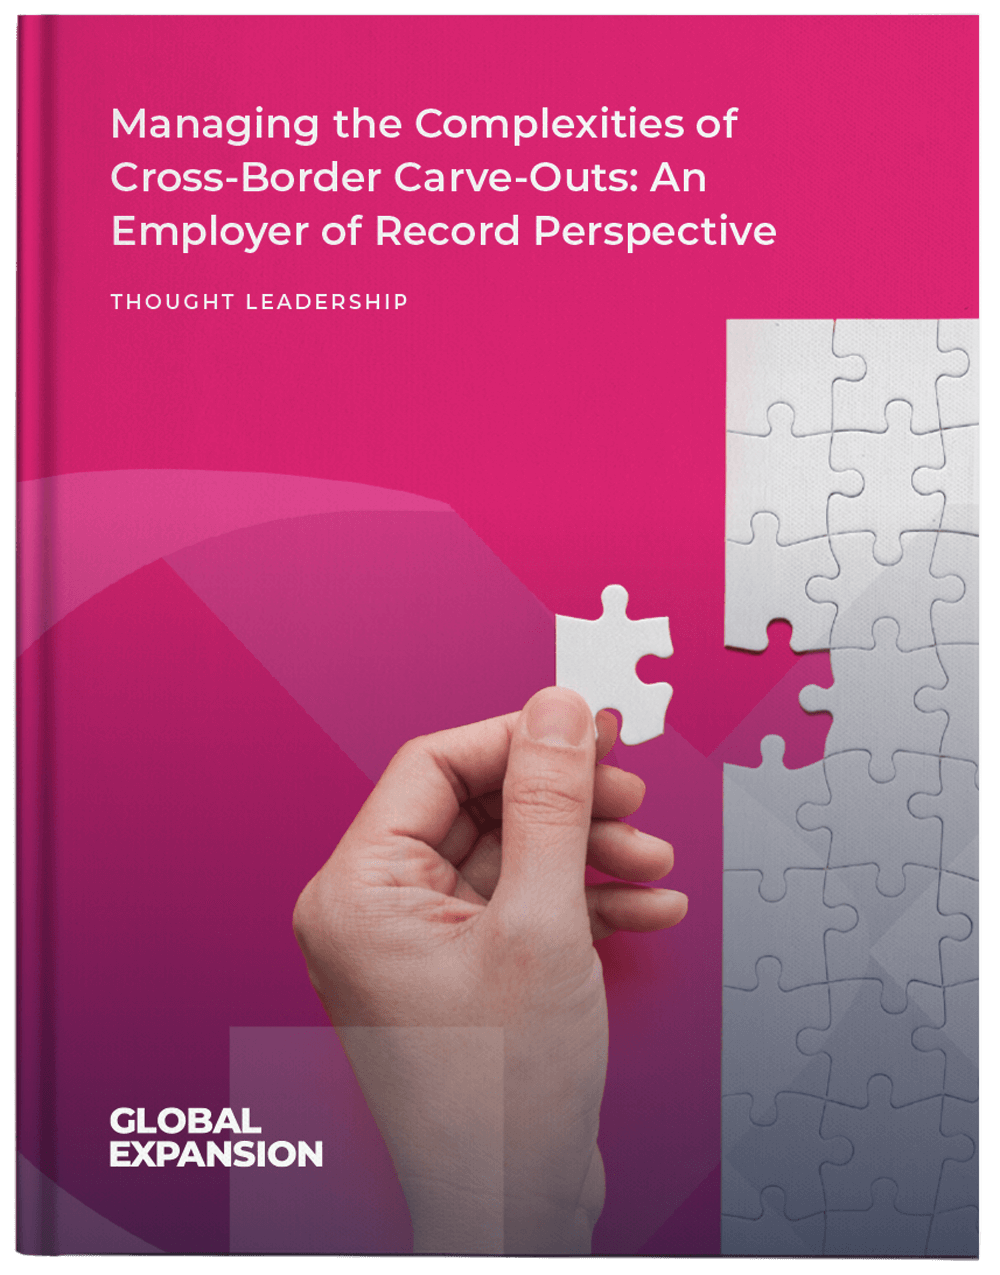 Managing-the-Complexities-of-Cross-Border-Carve-Outs-An-Employer-of-Record-Perspective-Cover